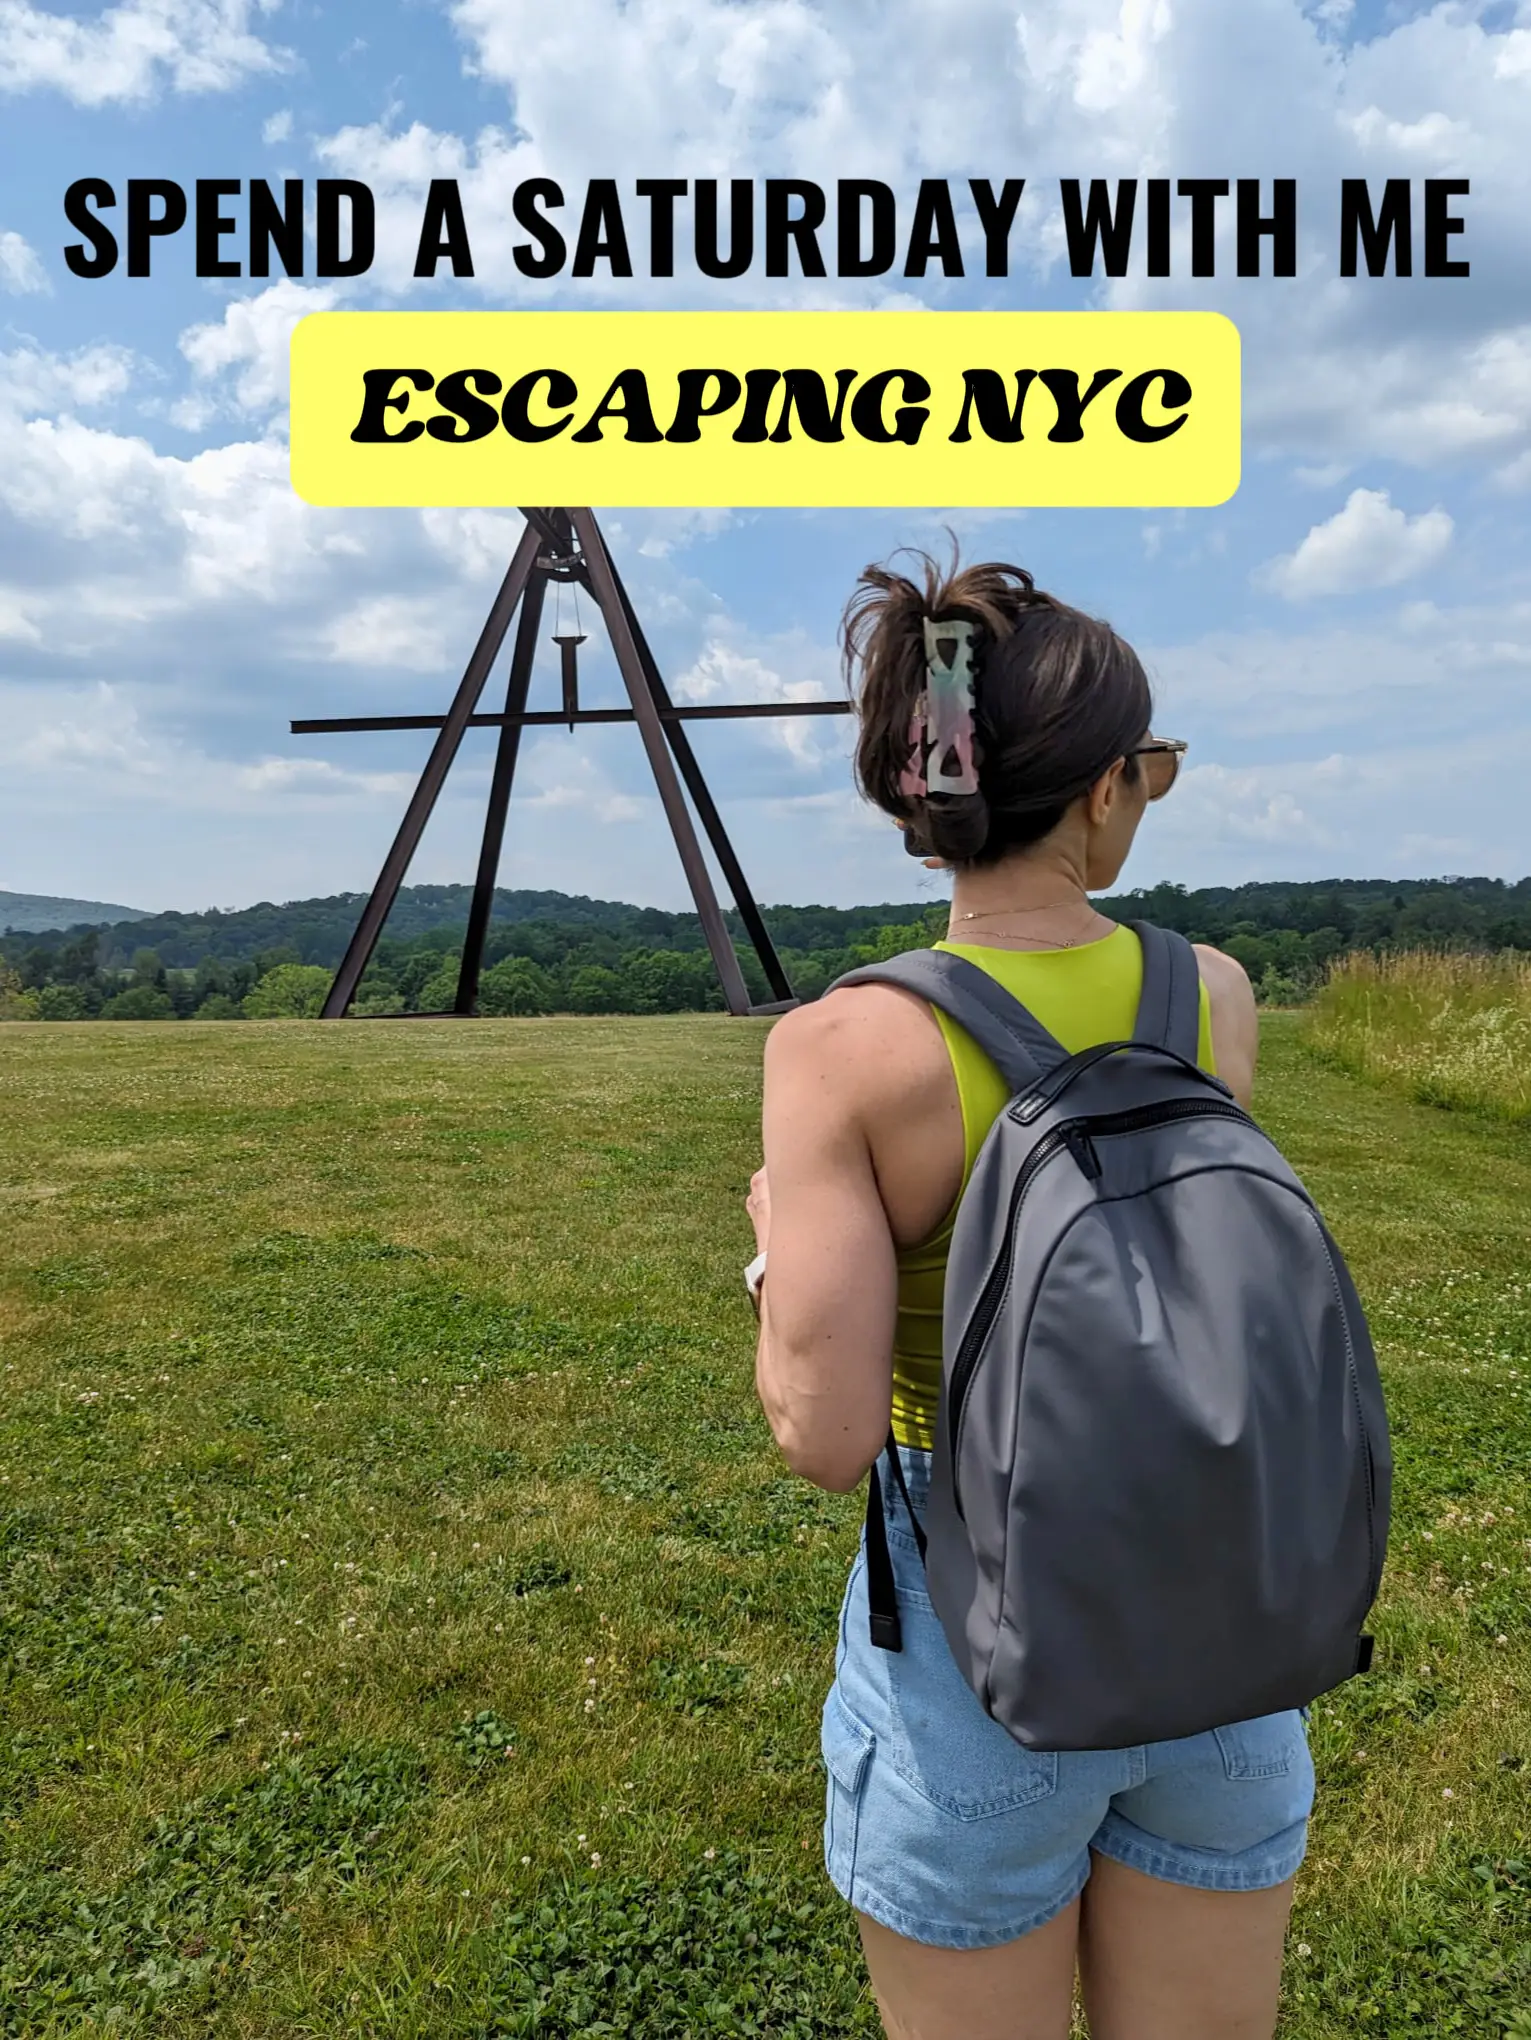 Spend a Saturday with me Escaping NYC's images